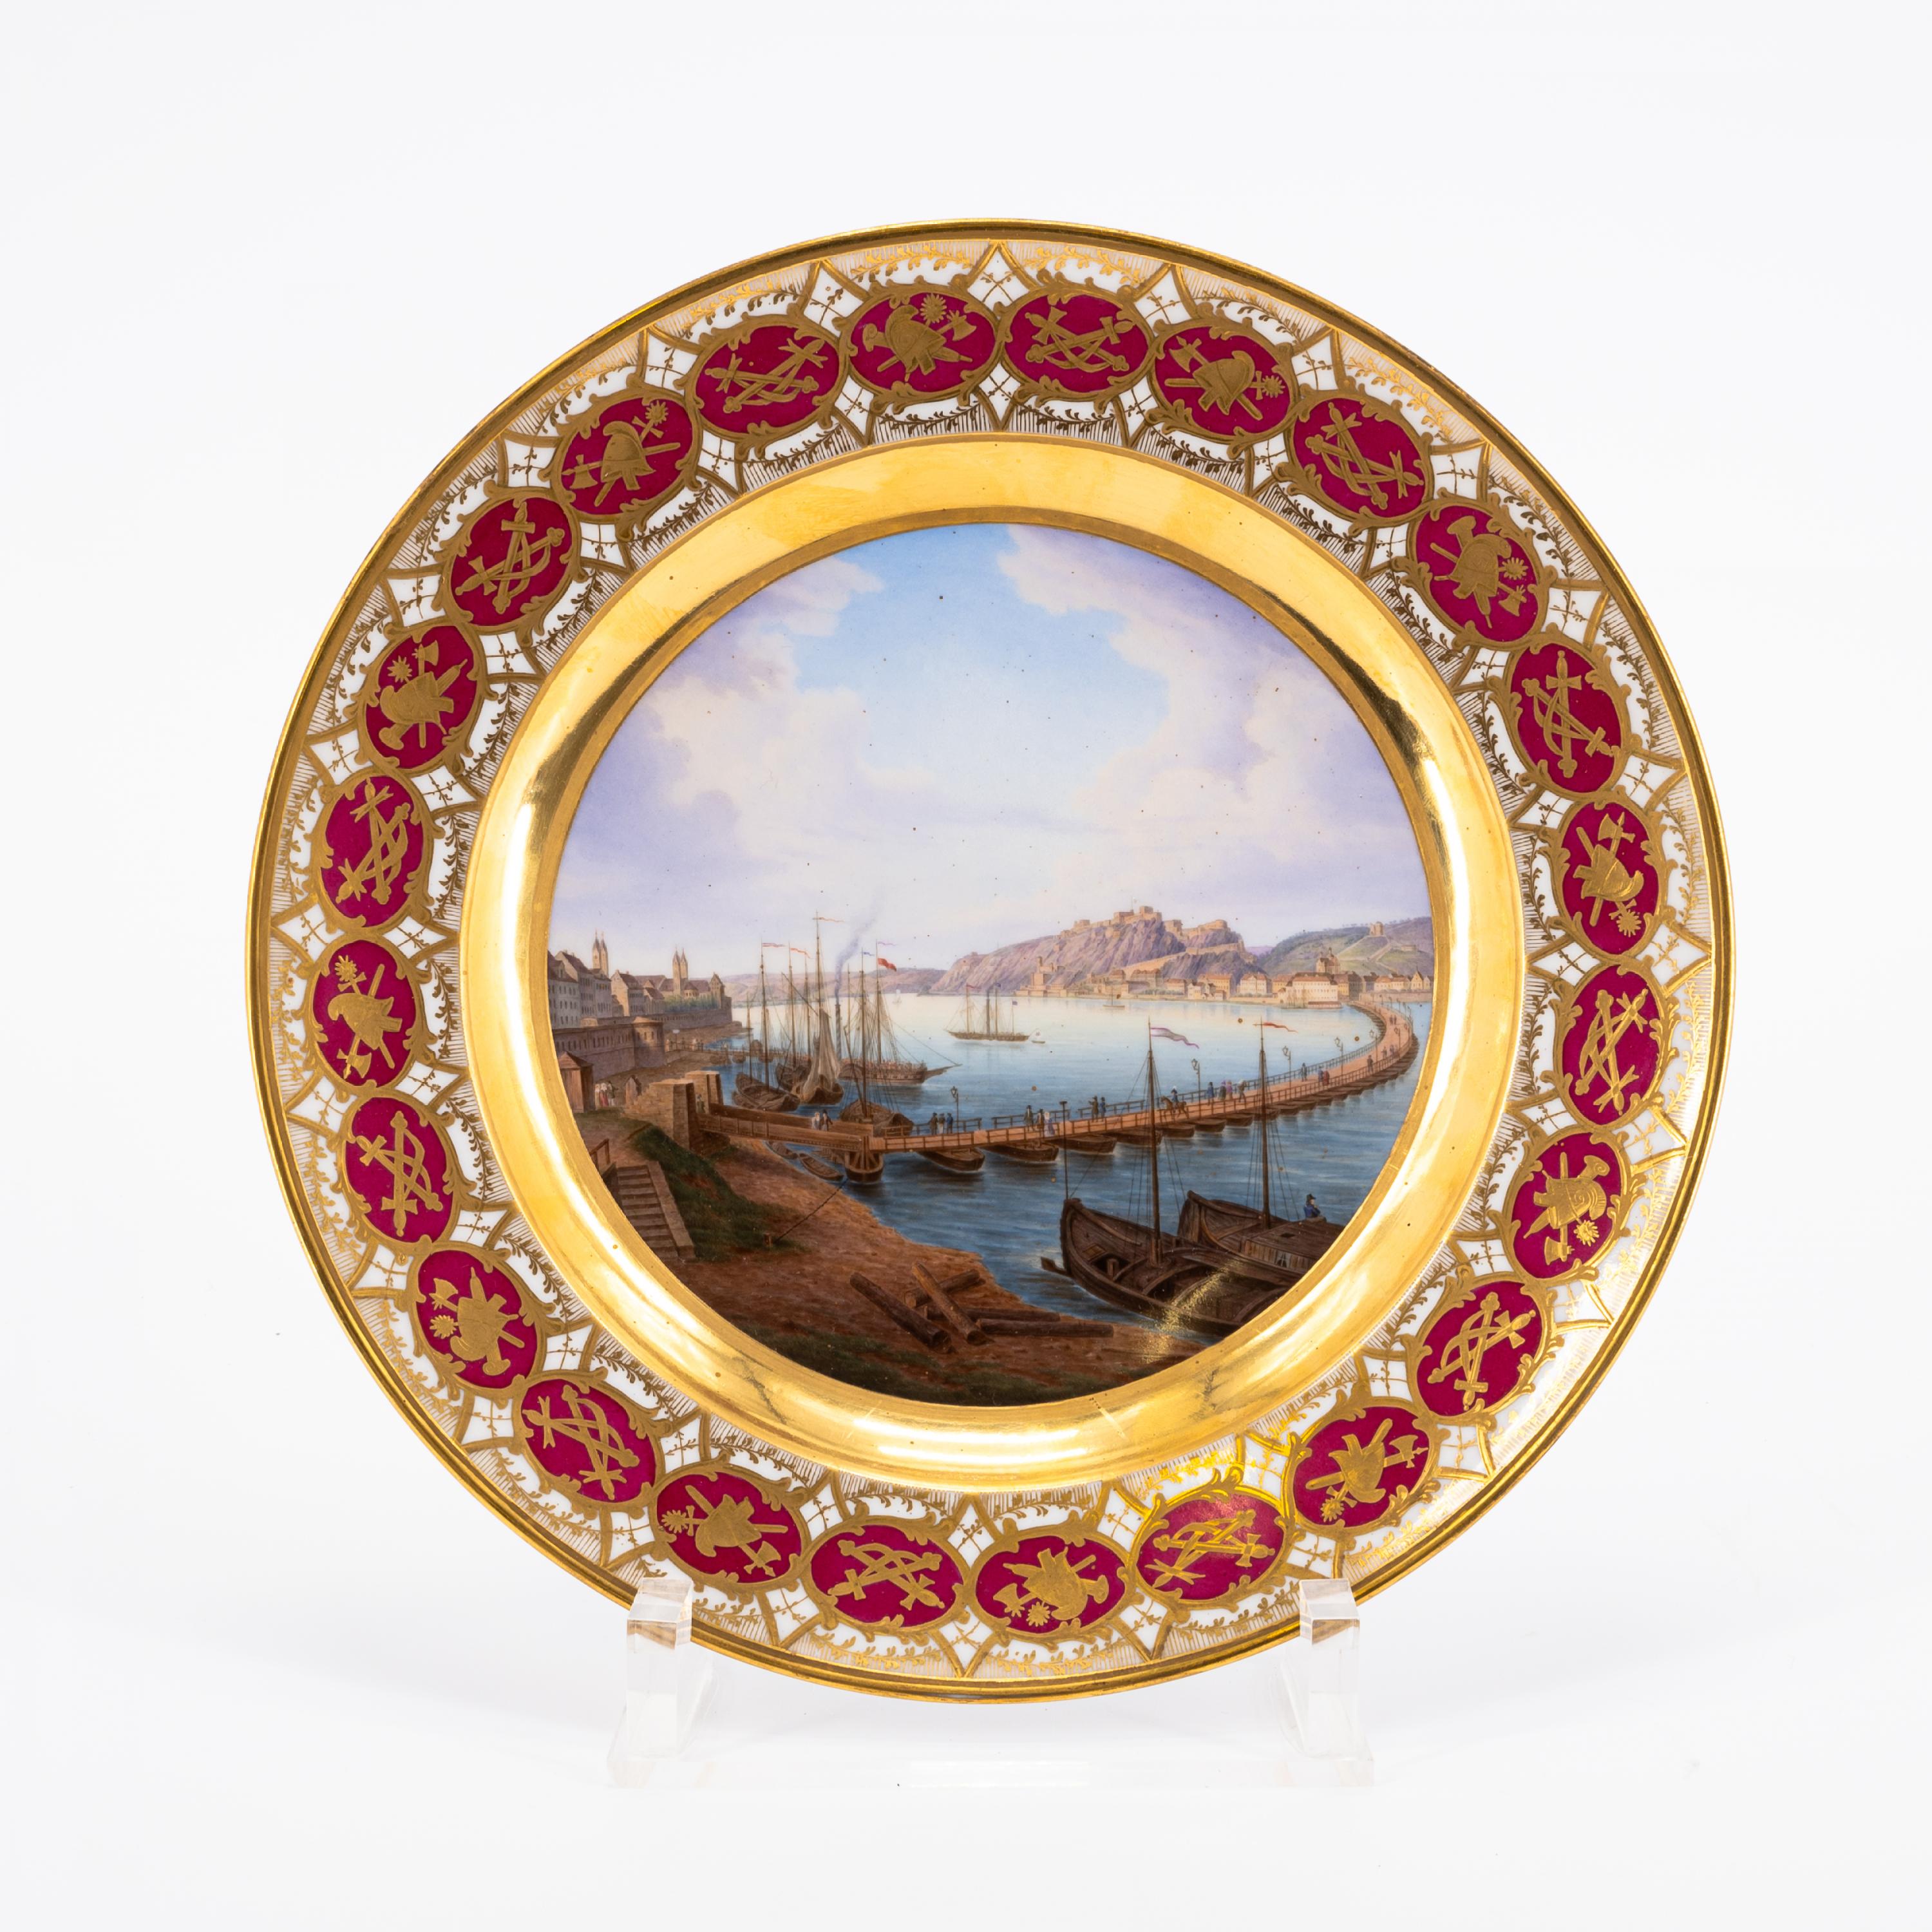 EXEPTIONAL SERIES OF TWELVE PORCELAIN PLATES WITH ROMANTIC VIEWS OF THE RHINE - Image 25 of 26